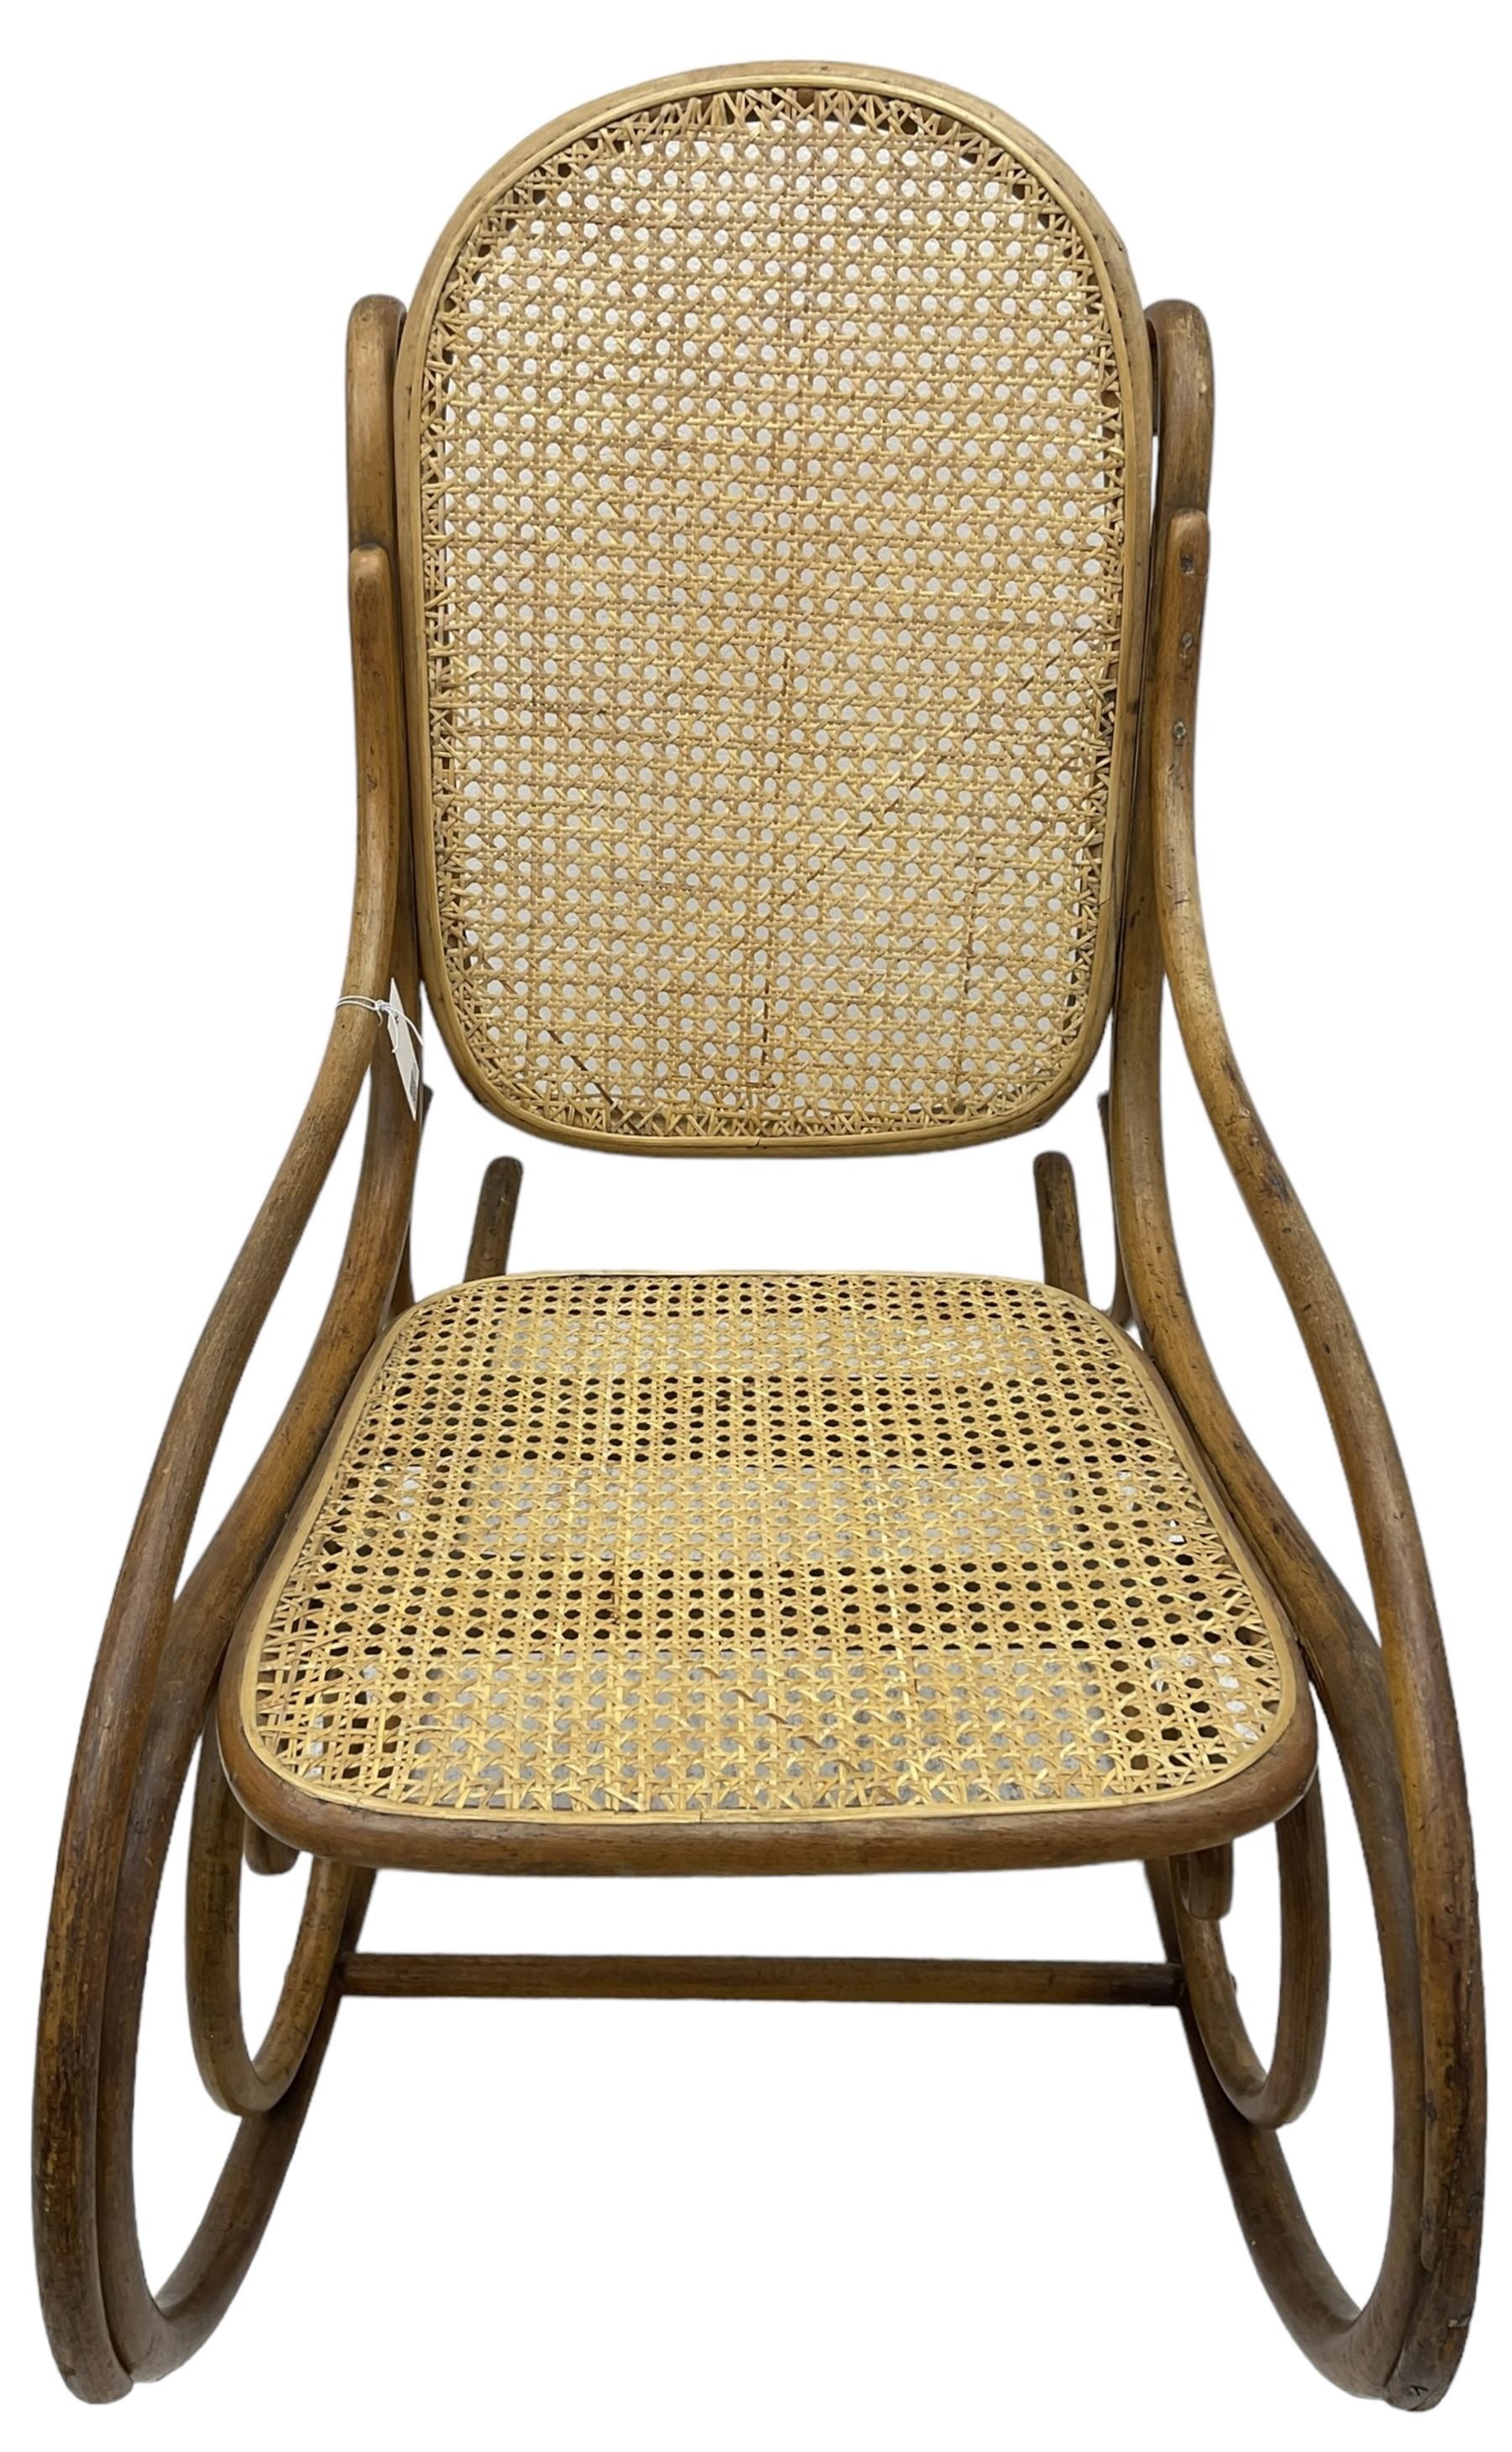 Early 20th century Michael Thonet design bentwood rocking chair - Image 3 of 7